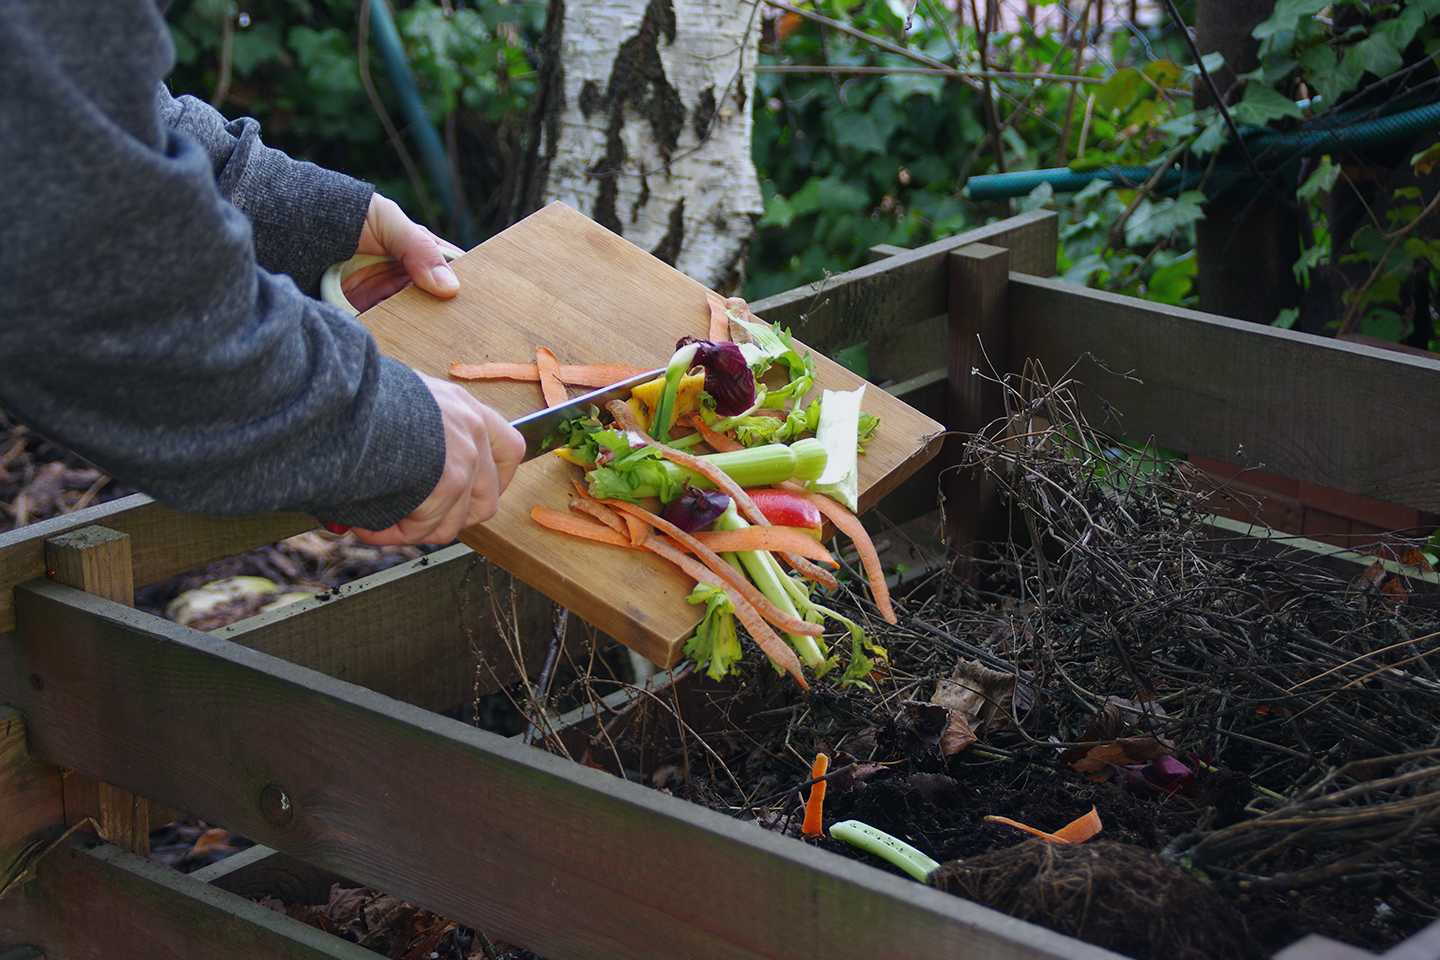 From extending the life of your veggies to composting, reducing your food waste doesn't need to be difficult.